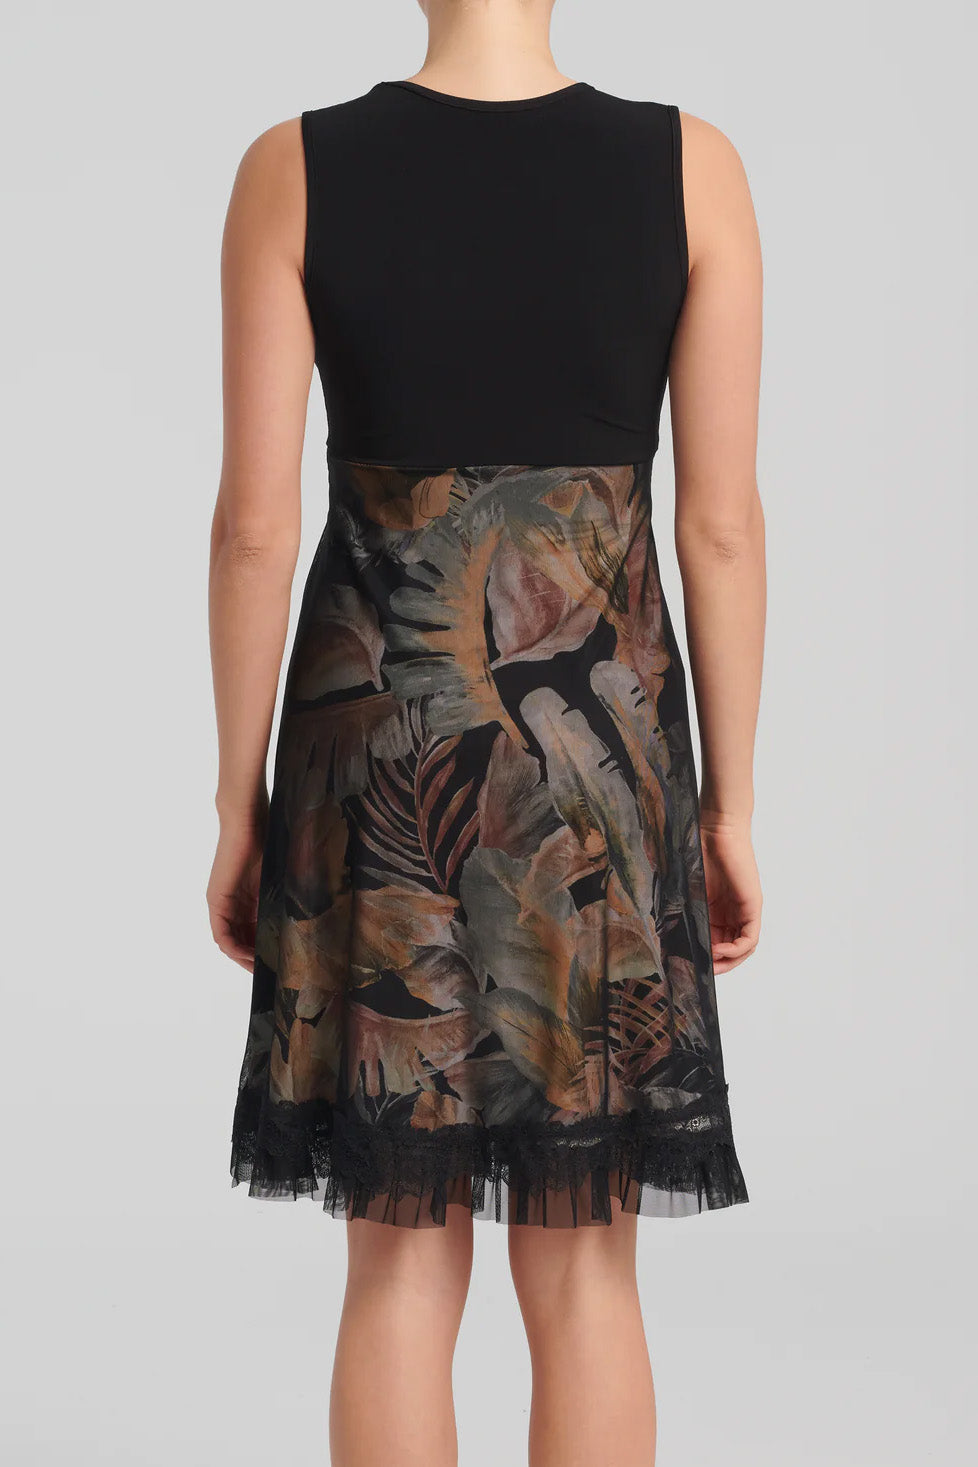 Levana Dress by Kollontai, back view, black top with wrap-over neckline and lace trim, sleeveless, empire waist, A-line skirt with tropical print under a black mesh layer, ruffled hem, knee length, sizes XS to XXL, made in Quebec